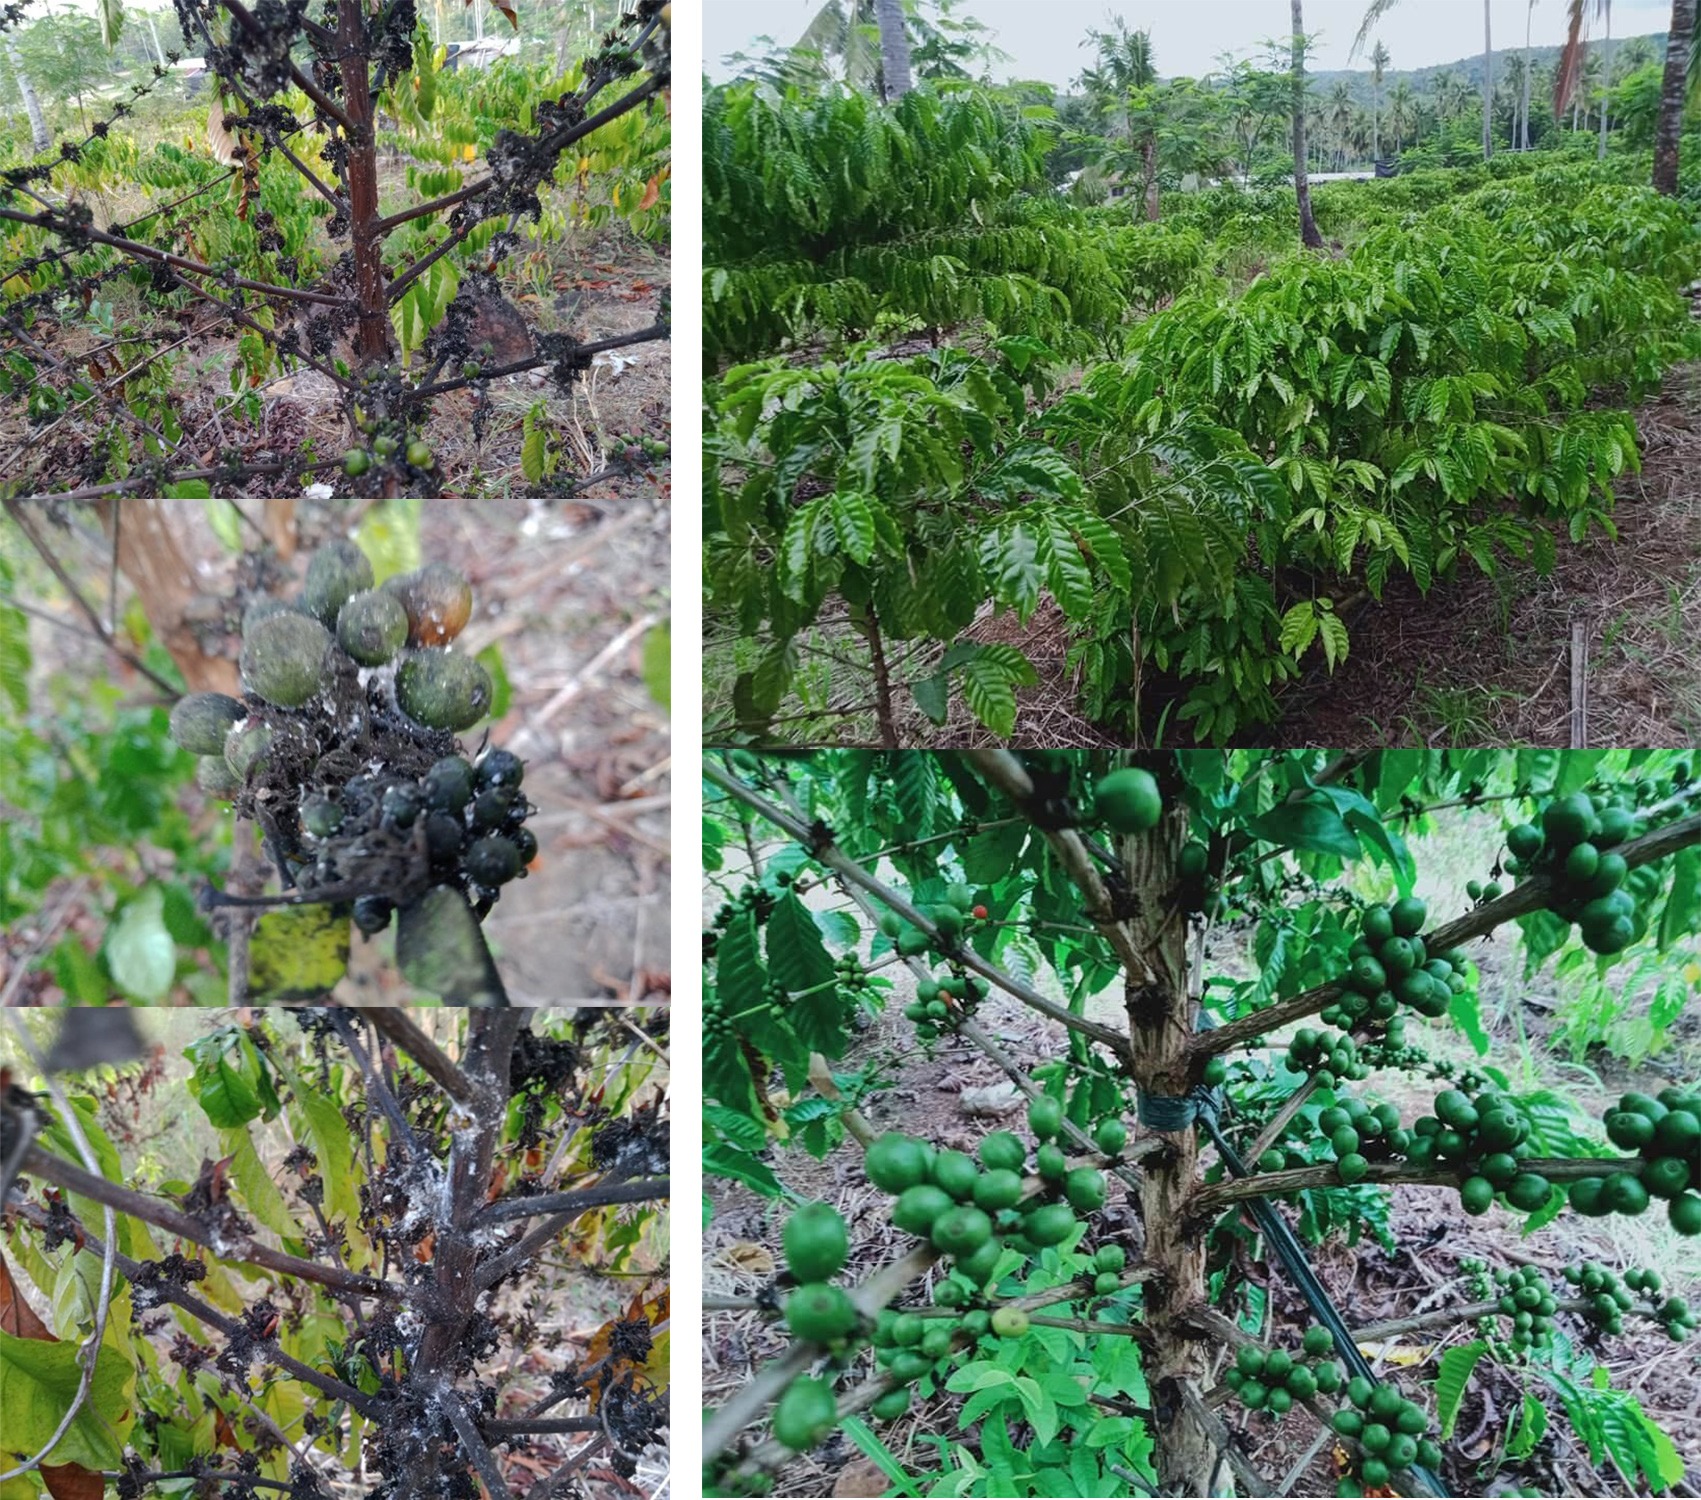 Philippines_PhilCAFE_Zamboanga Coffee Farm Before and After